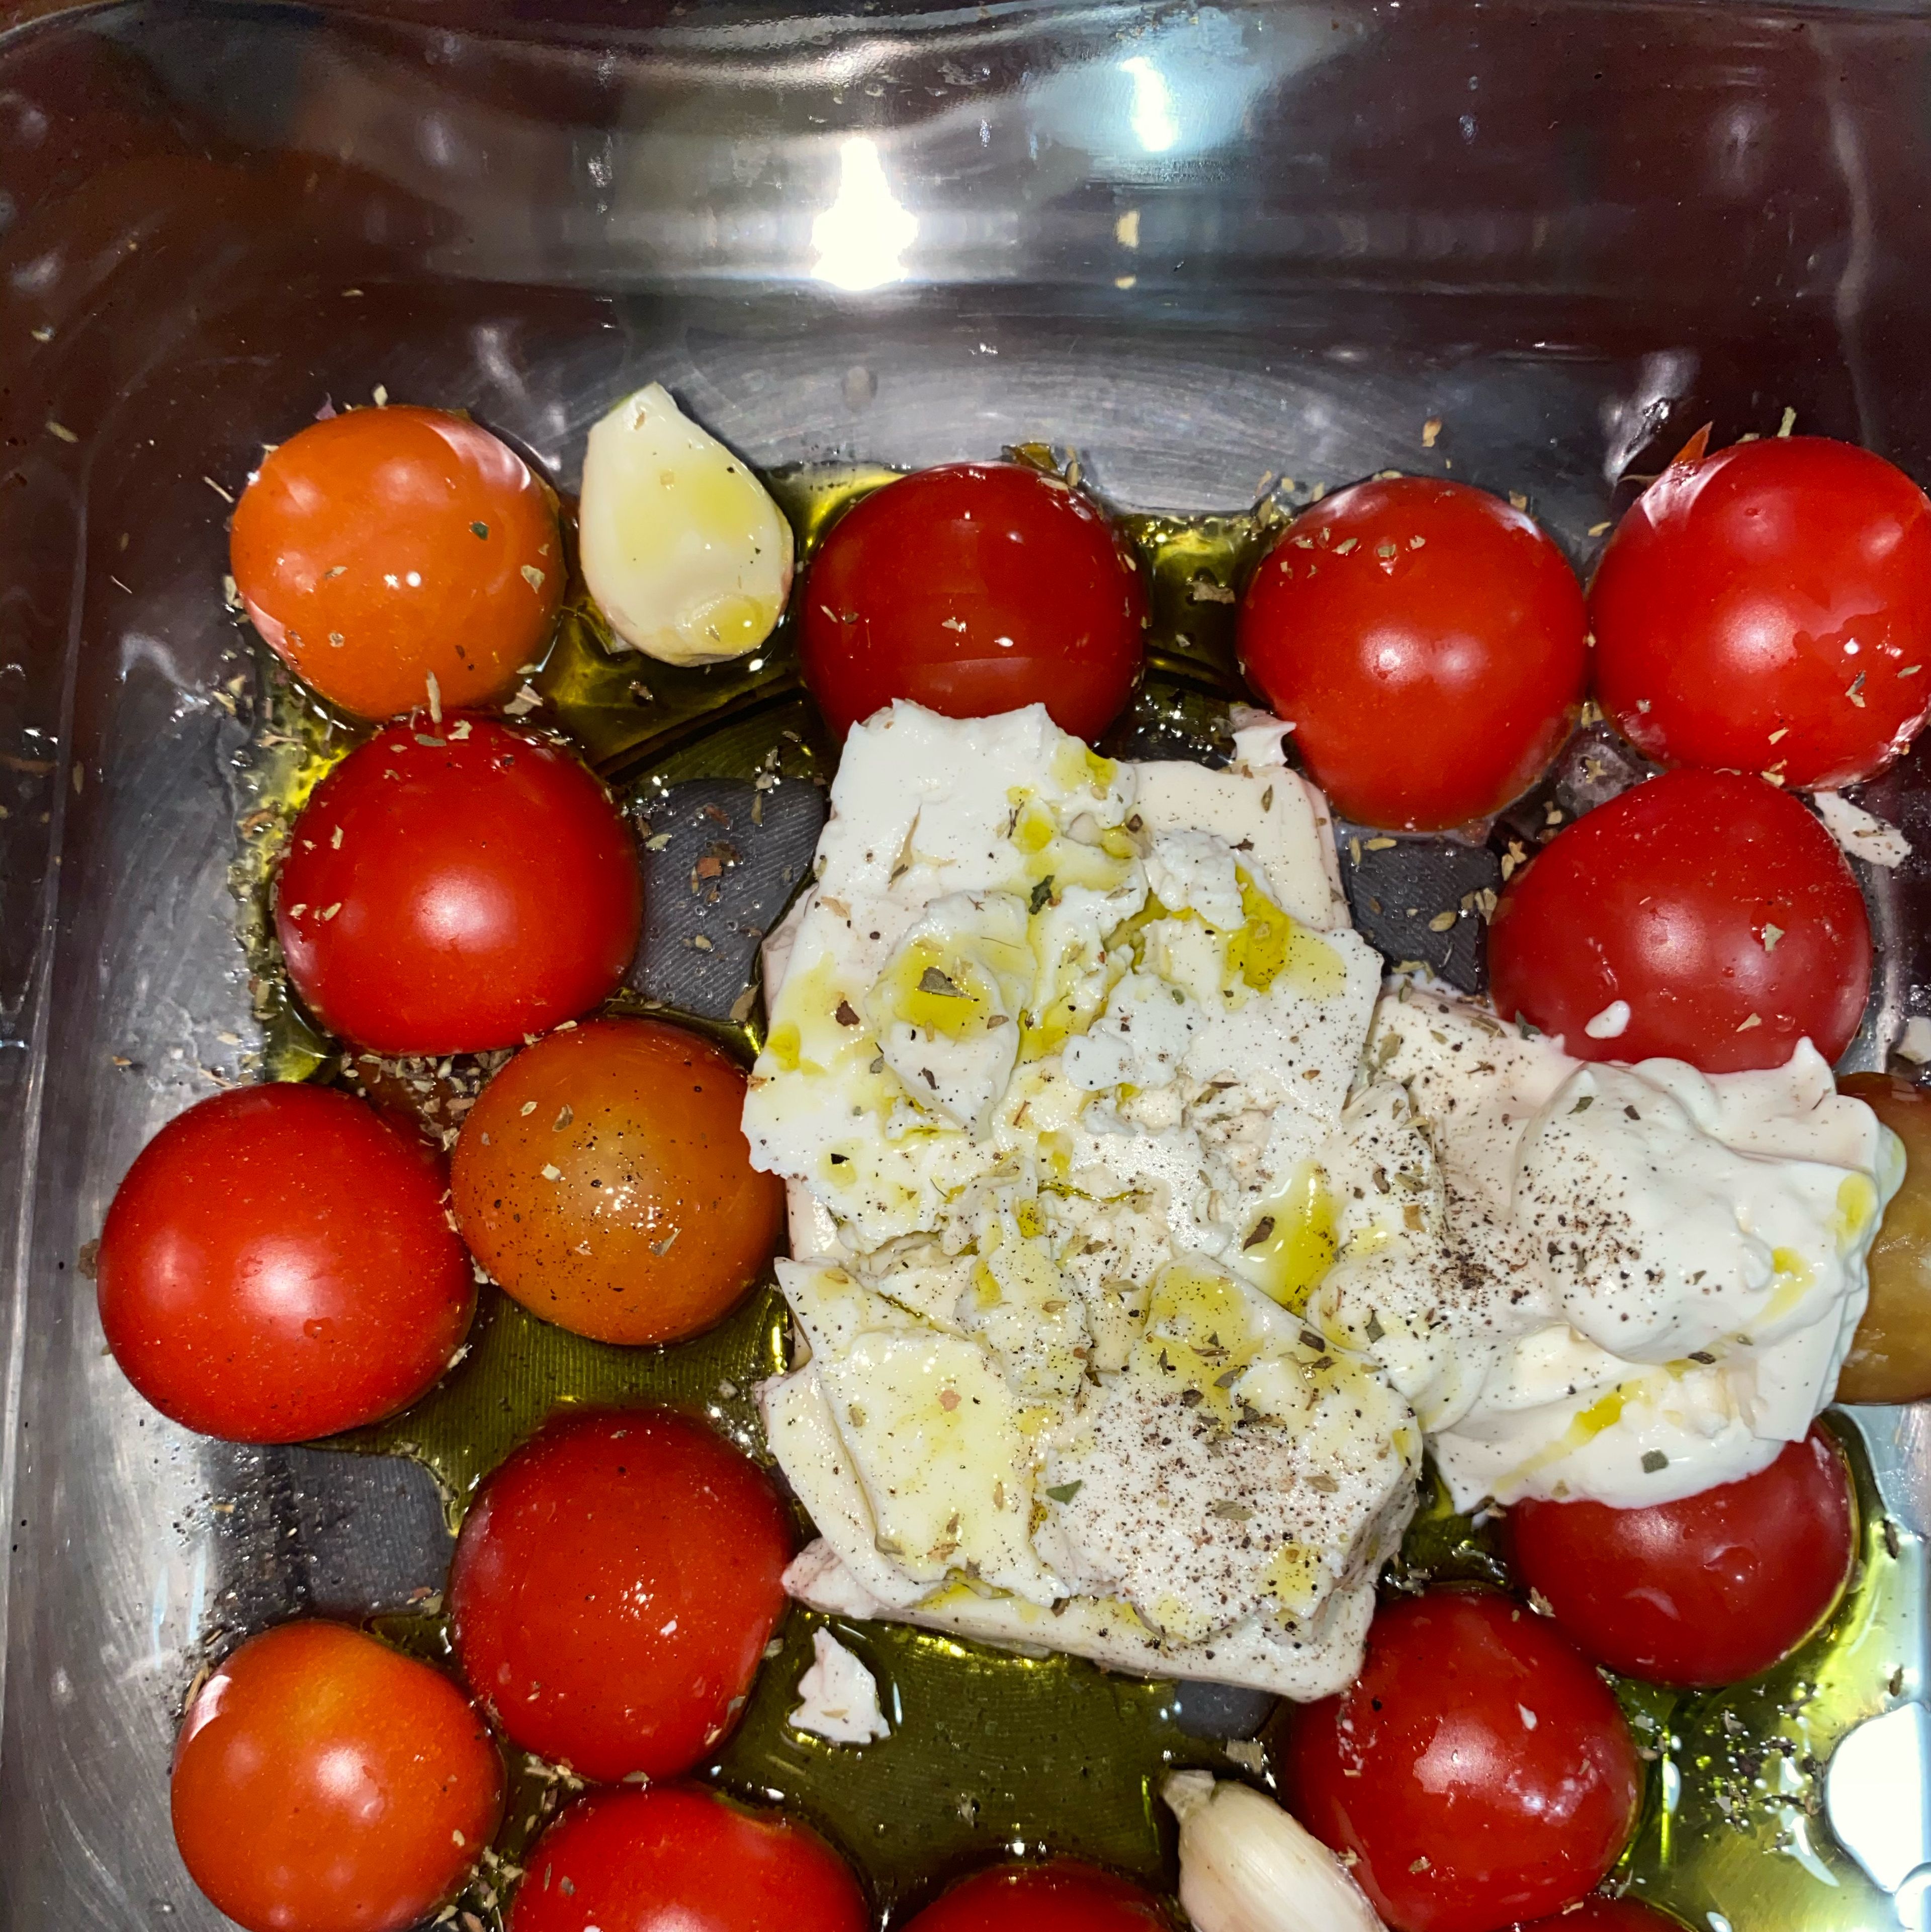 To a pan add sliced in half cherry tomatoes, 2-3 cloves of garlic, a block of Feta Cheese, a tbs of sower cream or cream cheese and some oregano and drizzle the extra virgin olive oil all over it. Add salt if the feta cheese is not salty enough.